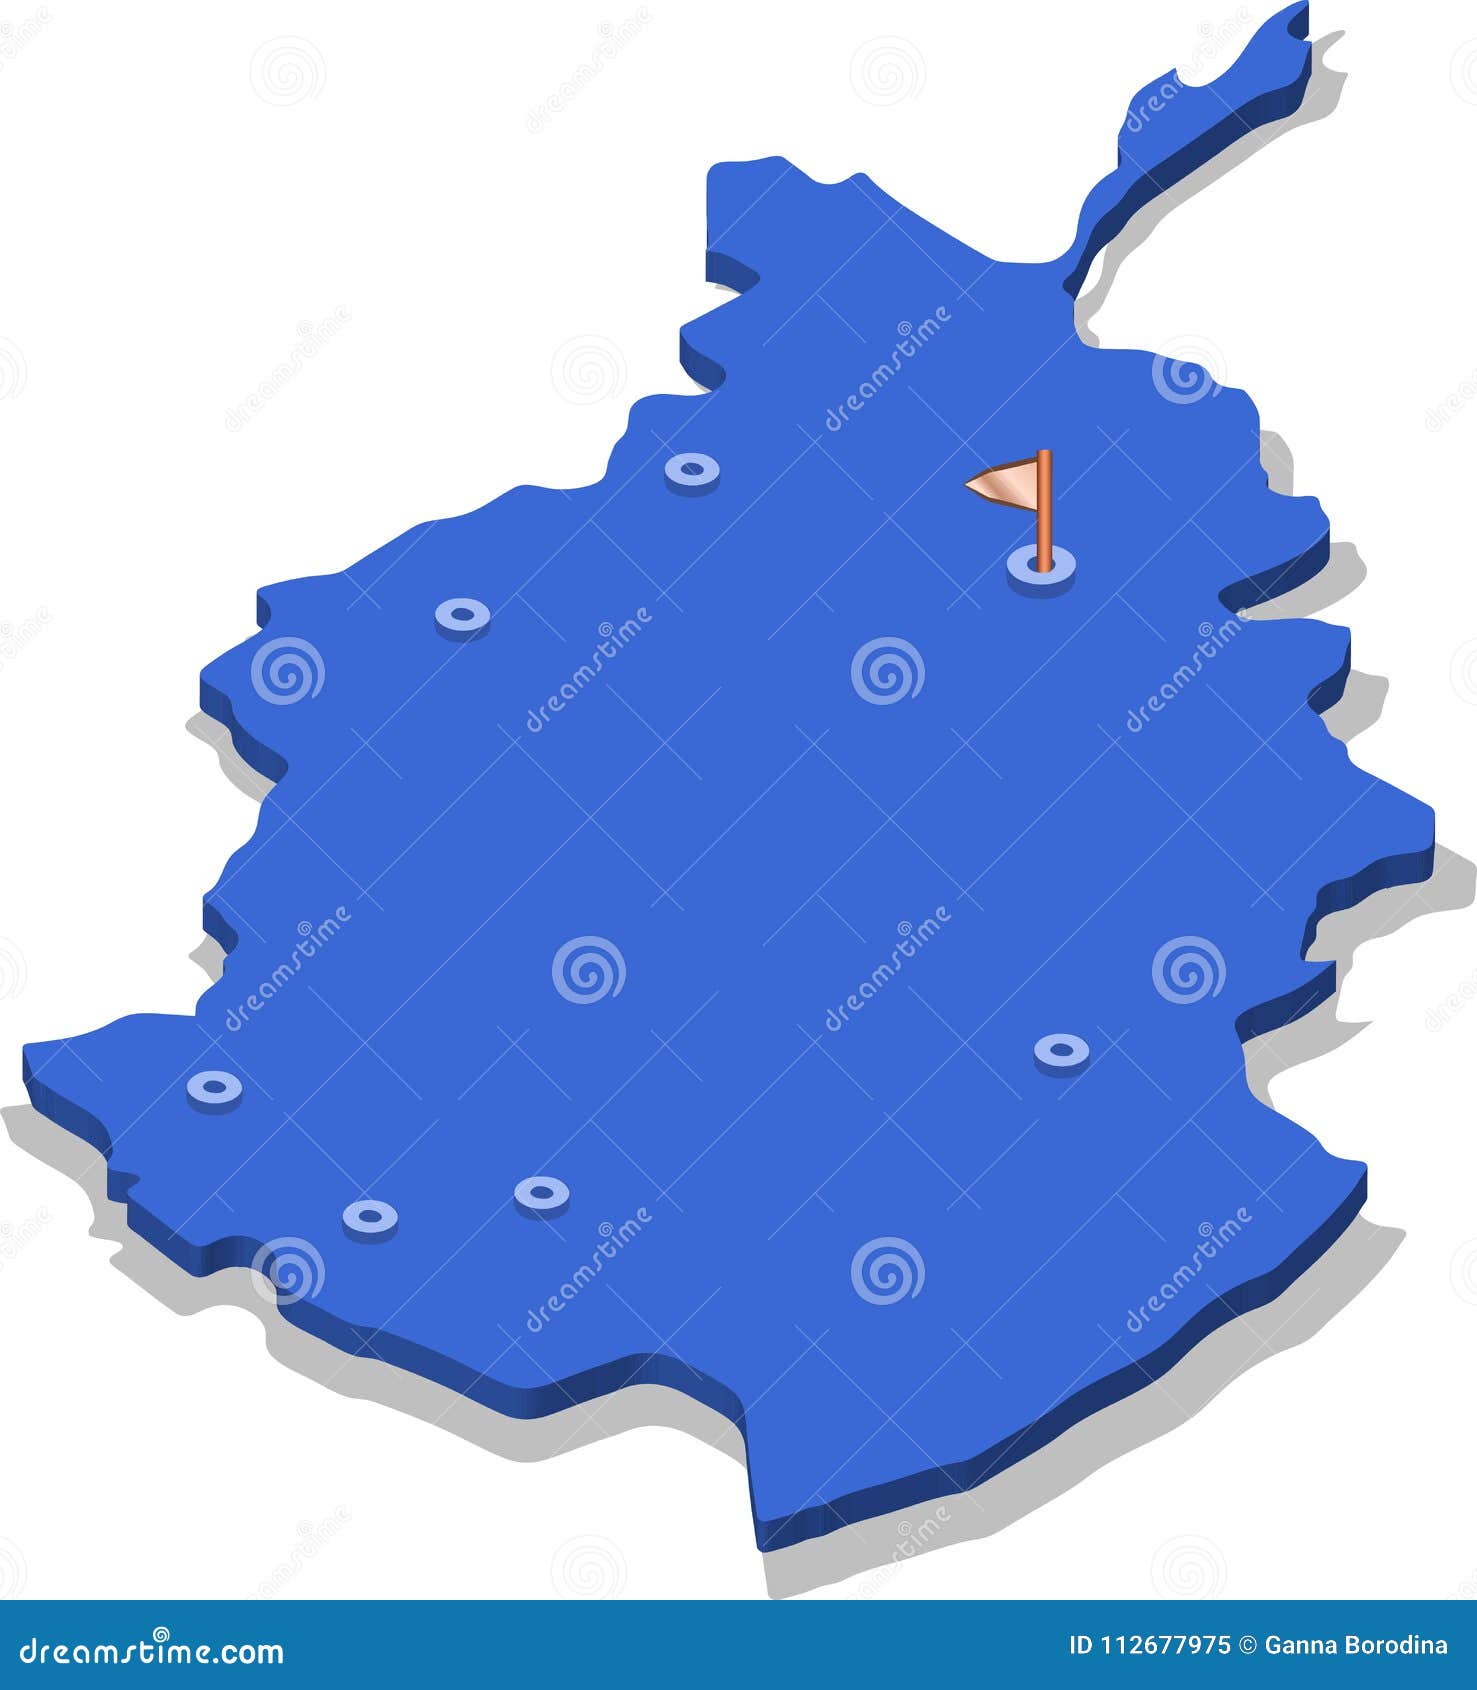 3d isometric view map of afganistan with blue surface and cities.